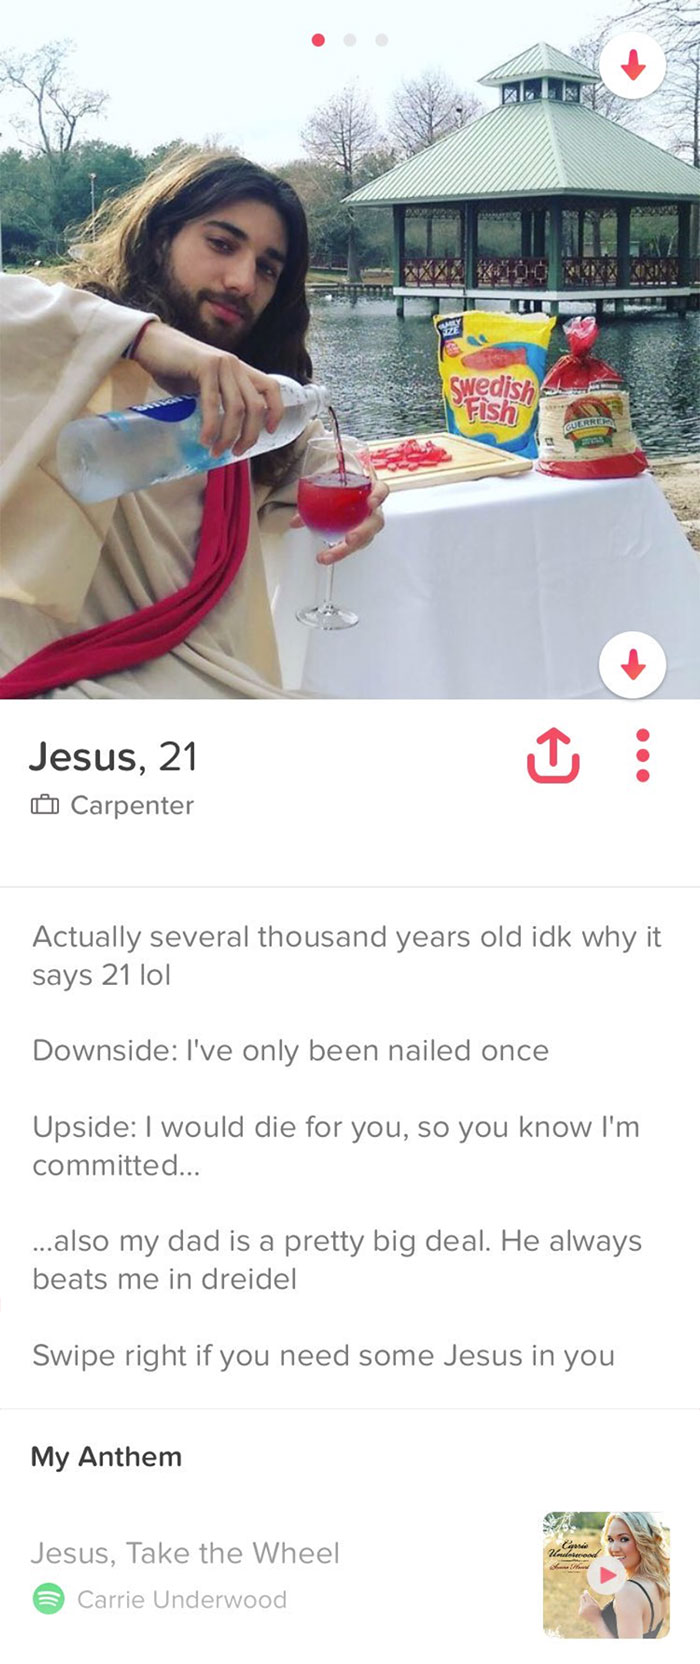 Funny catchprahses for tinder profile